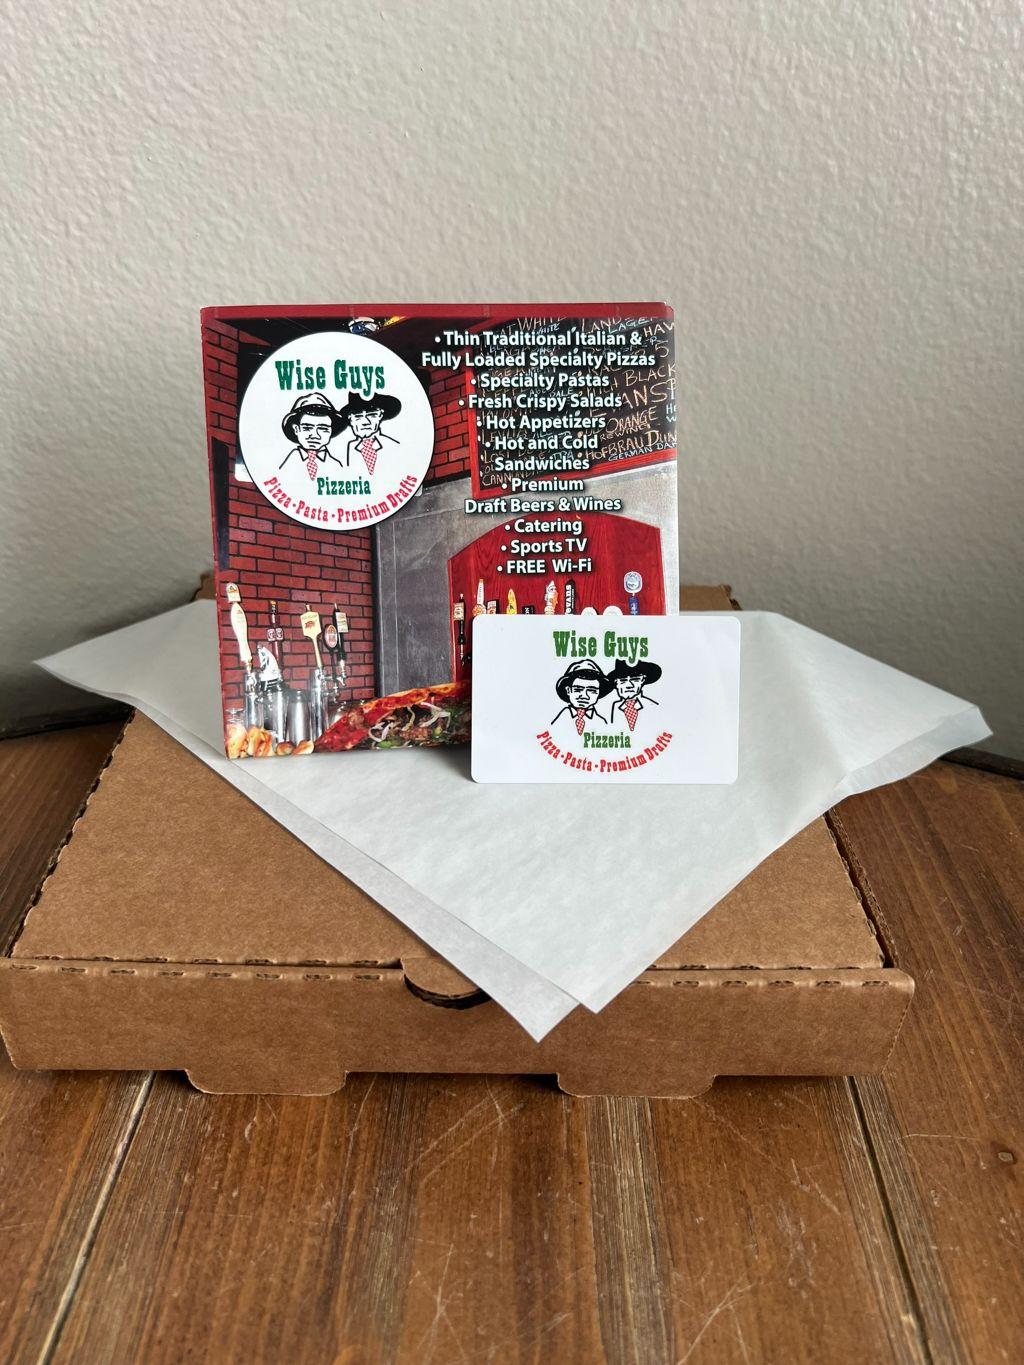 Wise Guy Pizzeria Gift Card